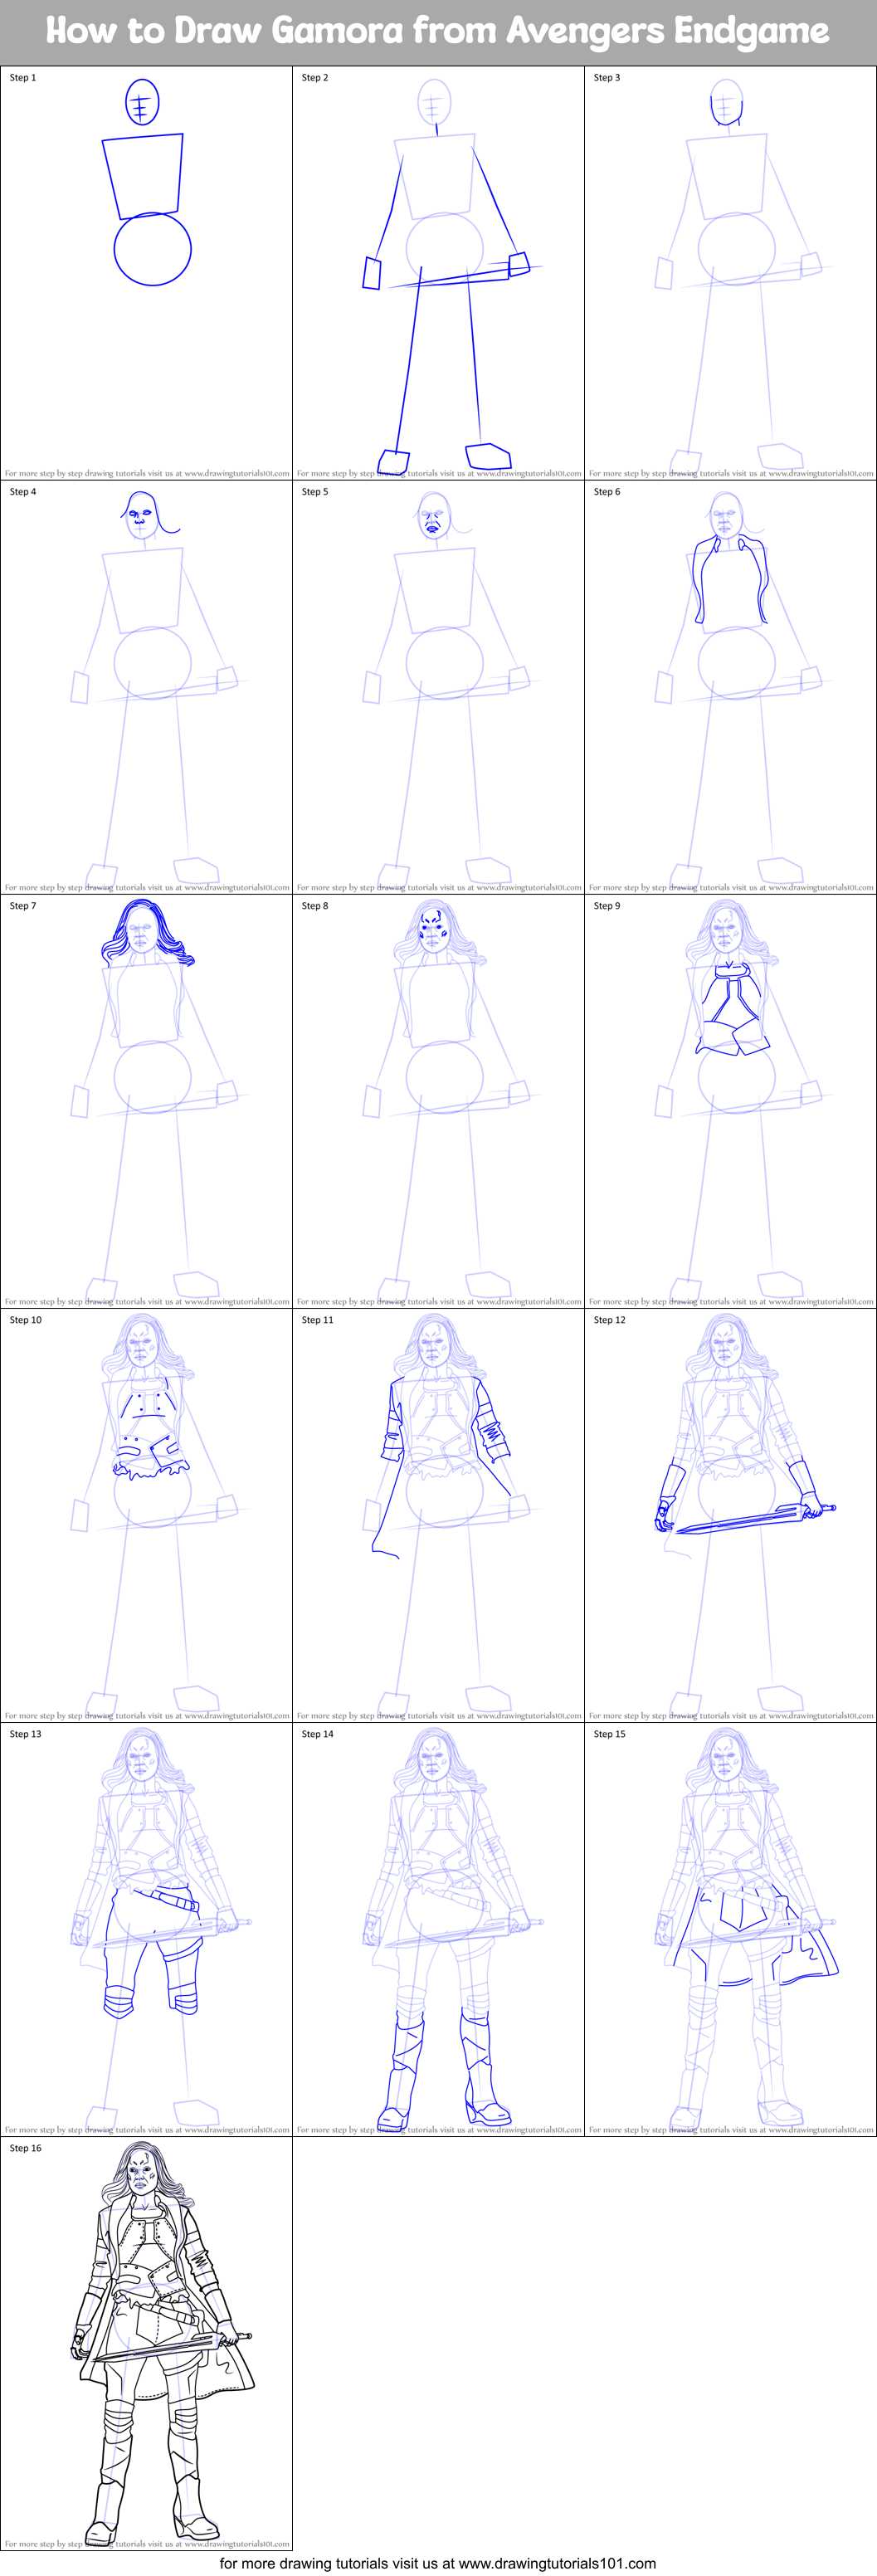 How to Draw Gamora from Avengers Endgame printable step by step drawing